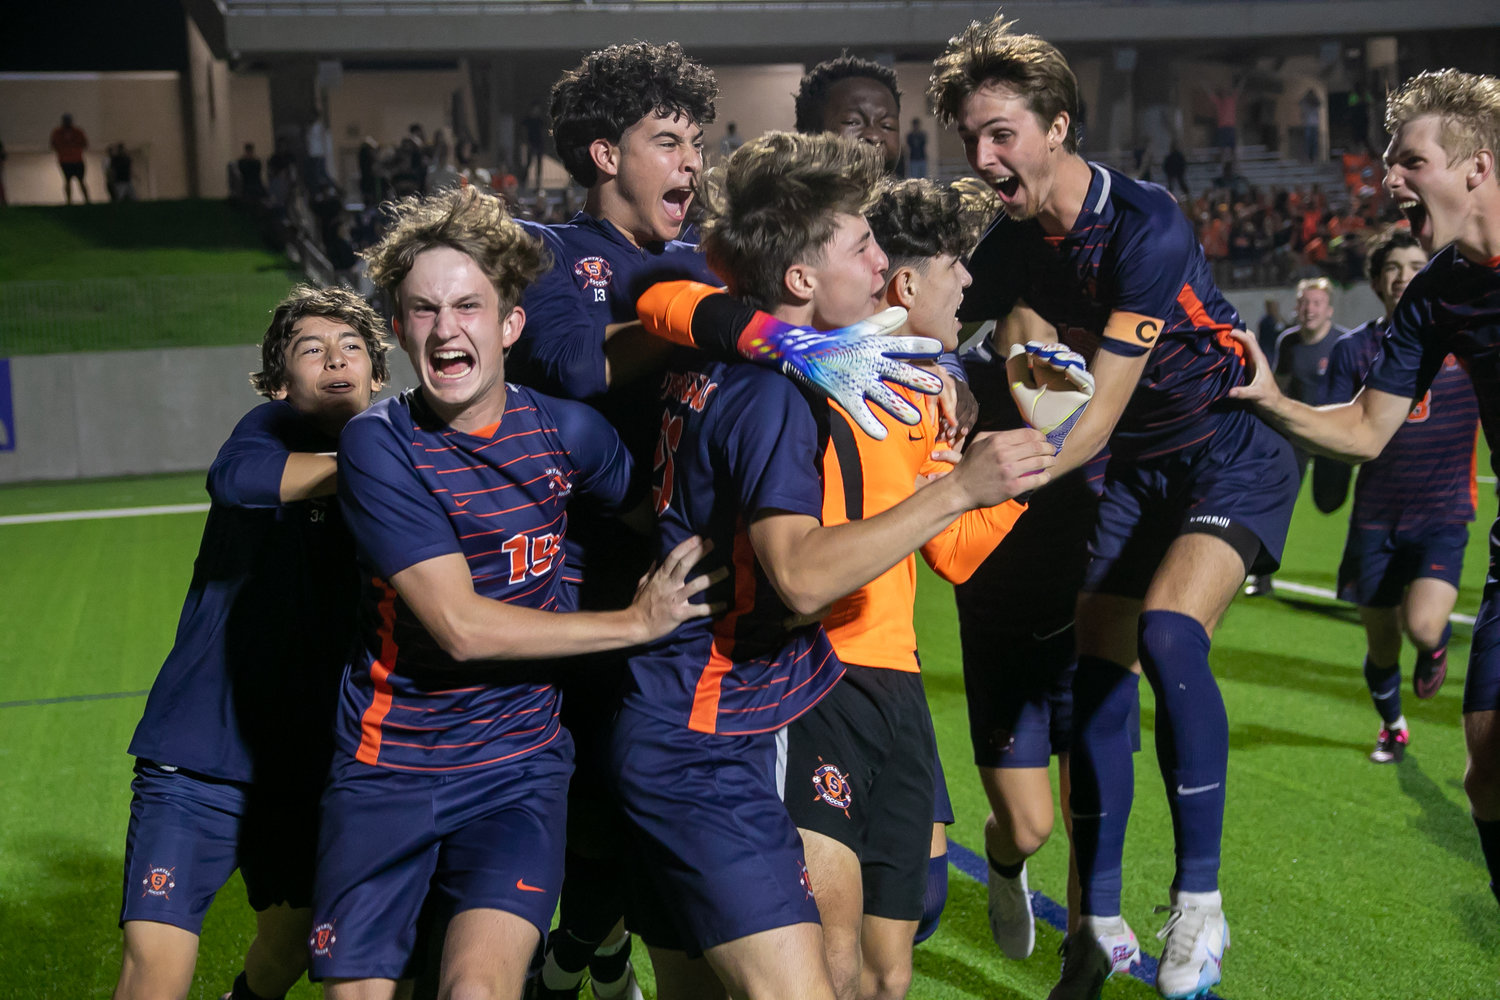 Seven Lakes players celebrate after winning Friday's Class 6A Regional Quarterfinal game between Seven Lakes and Cinco Ranch at Legacy Stadium.